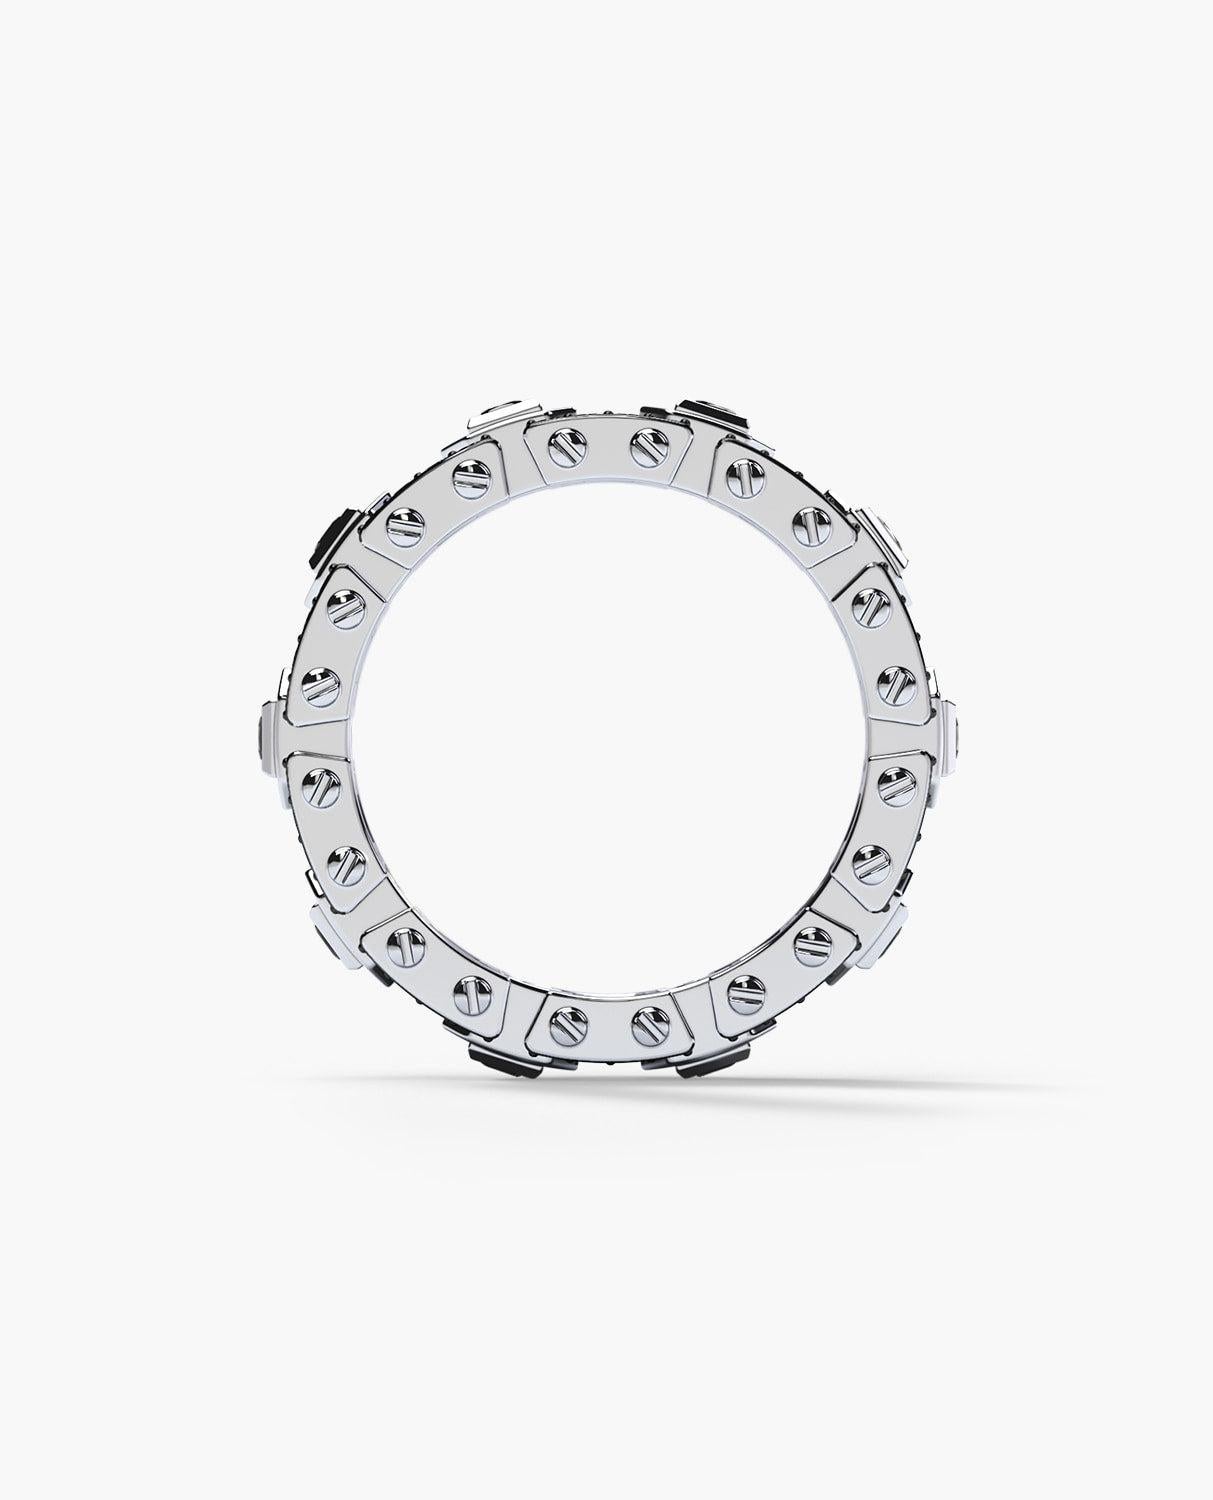 The design of the La Paz bridges two different styles in its variations of 1.20-carat diamond pave setting and metals: contemporary classic and cutting-edge modern. Unlike most Rockford products which are fully bespoke, this ring is pre-customized